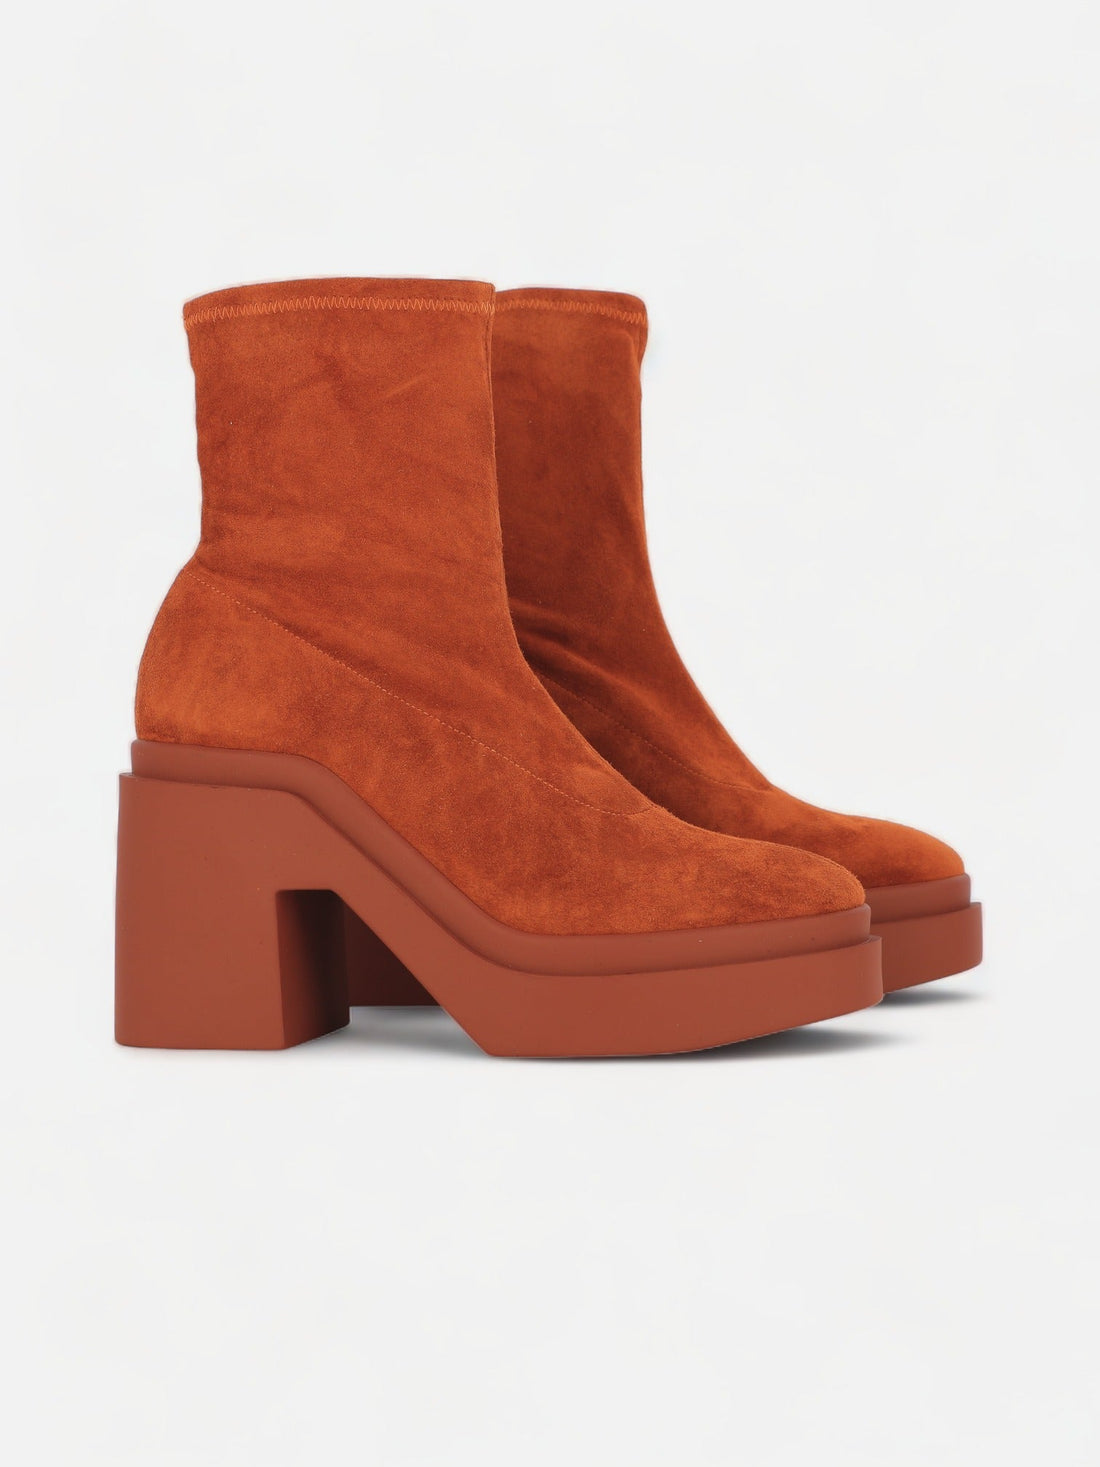 ANKLE BOOTS - NINA ankle boots, suede leather brown - 3606063819374 - Clergerie Paris - Europe